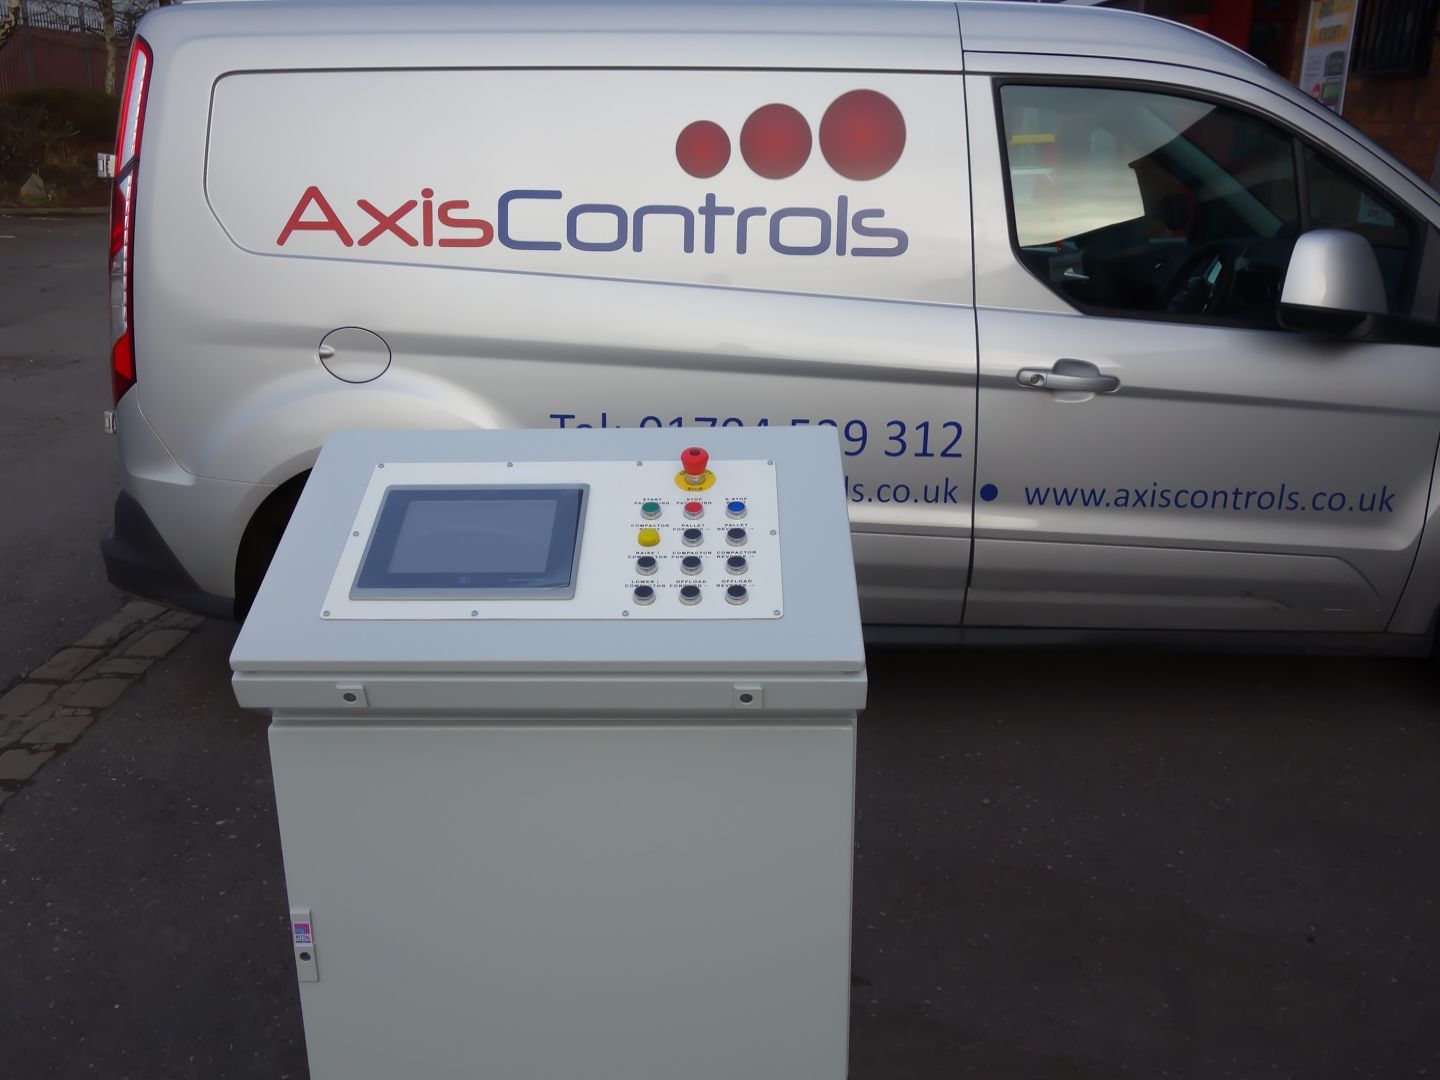 Bespoke control desks, designed and built by Axis Controls